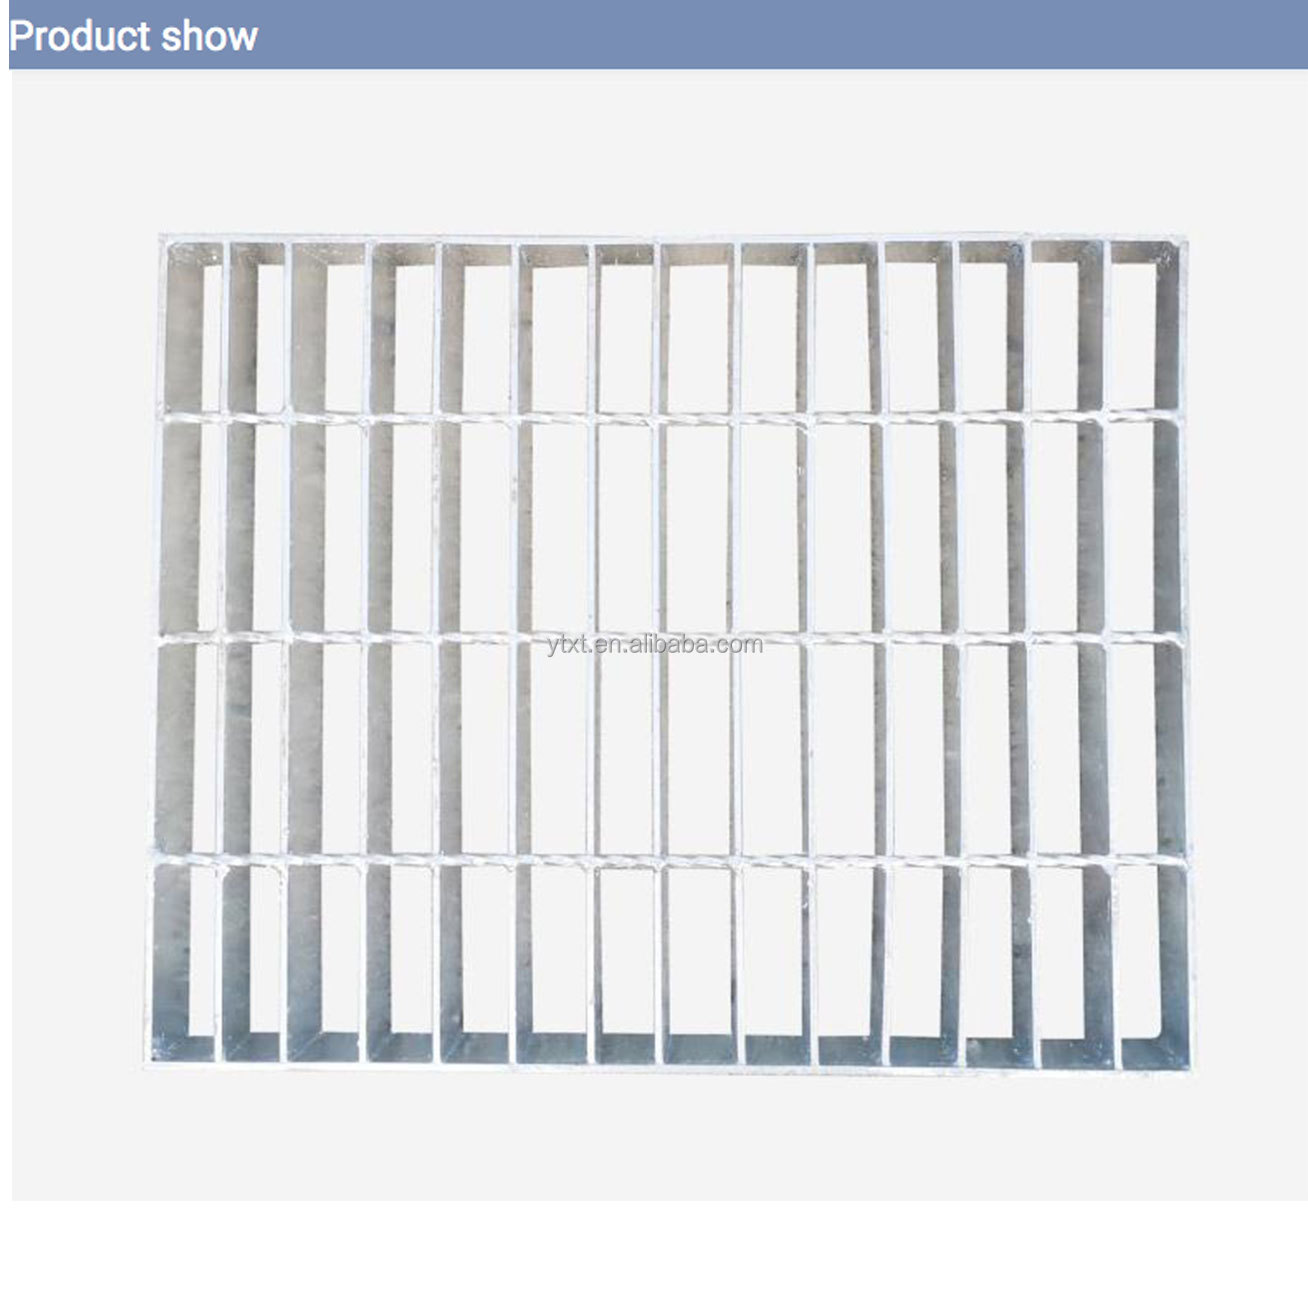 Galvanized Stainless Grating Price Trench Drain Plain Style Steel Grating